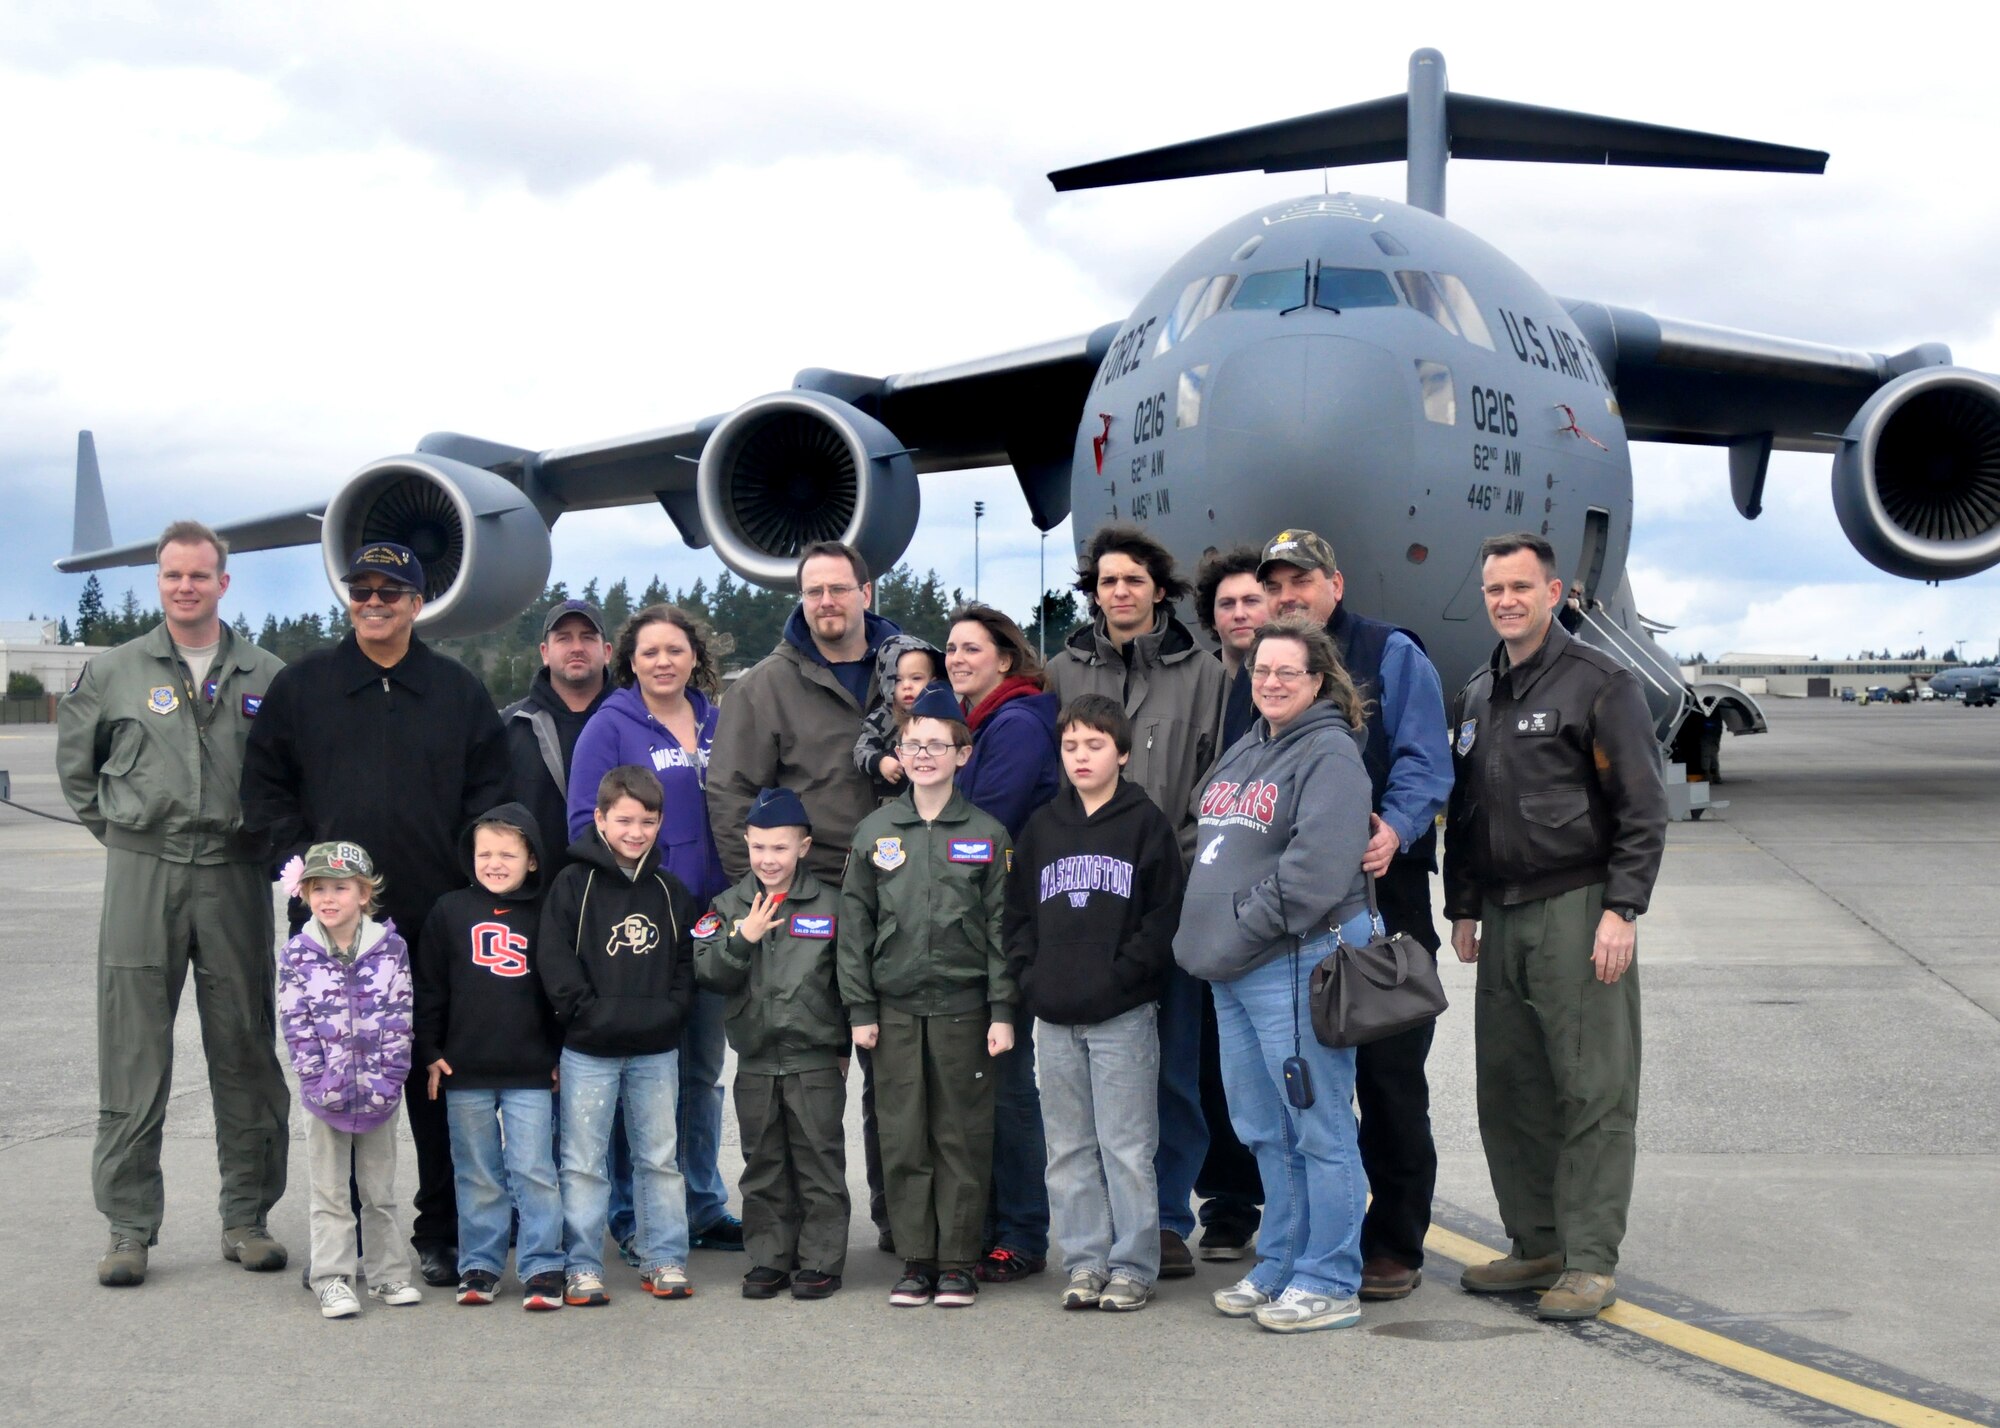 Caleb and Jeremiah Pancake, along with family members, stand in front of a C-17 Globemaster III with members of the 4th Airlift Squadron as part of the Pilot for a Day program March 16, 2012, at Joint Base Lewis-McChord, Wash. The guests had an opportunity to tour the JBLM fire station, experience an explosive ordnance disposal demonstration and get a personal tour of a C-17 Globemaster III.  (U.S. Air Force photo/Airman 1st Class Leah Young)